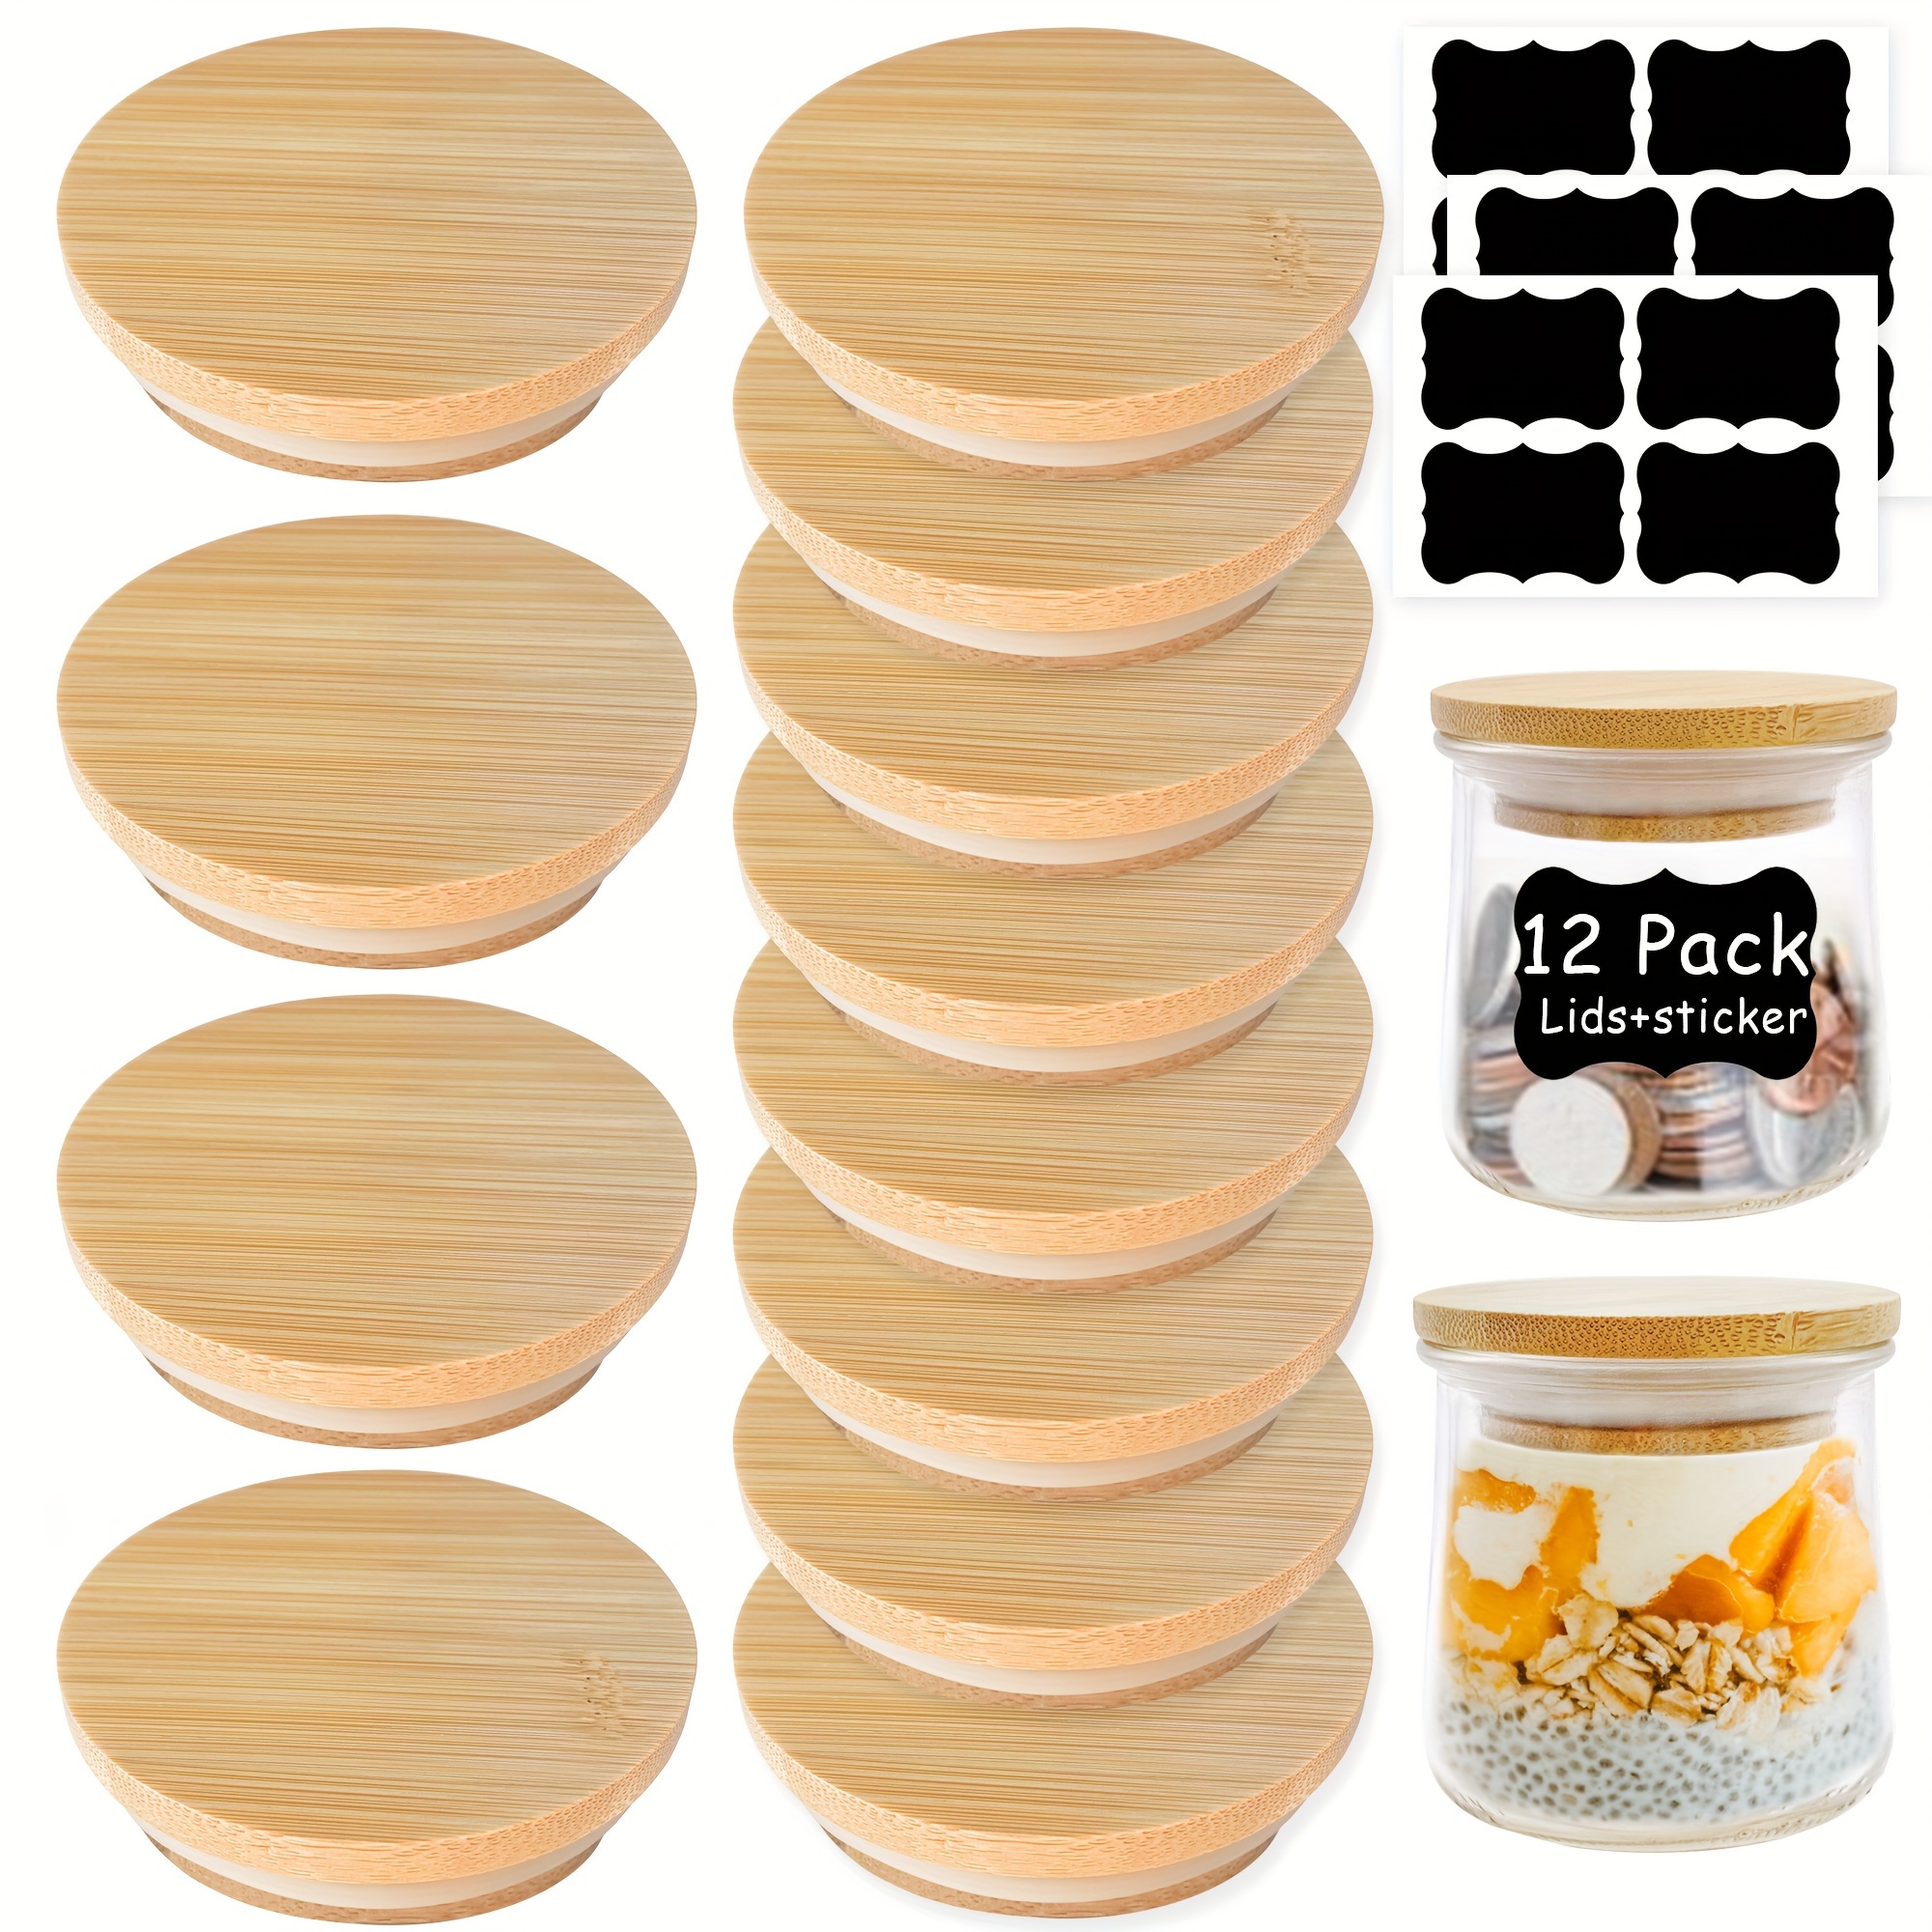 12 Pcs Square Glass Spice Jars with Natural Bamboo Lids - 5Oz Airtight Herb